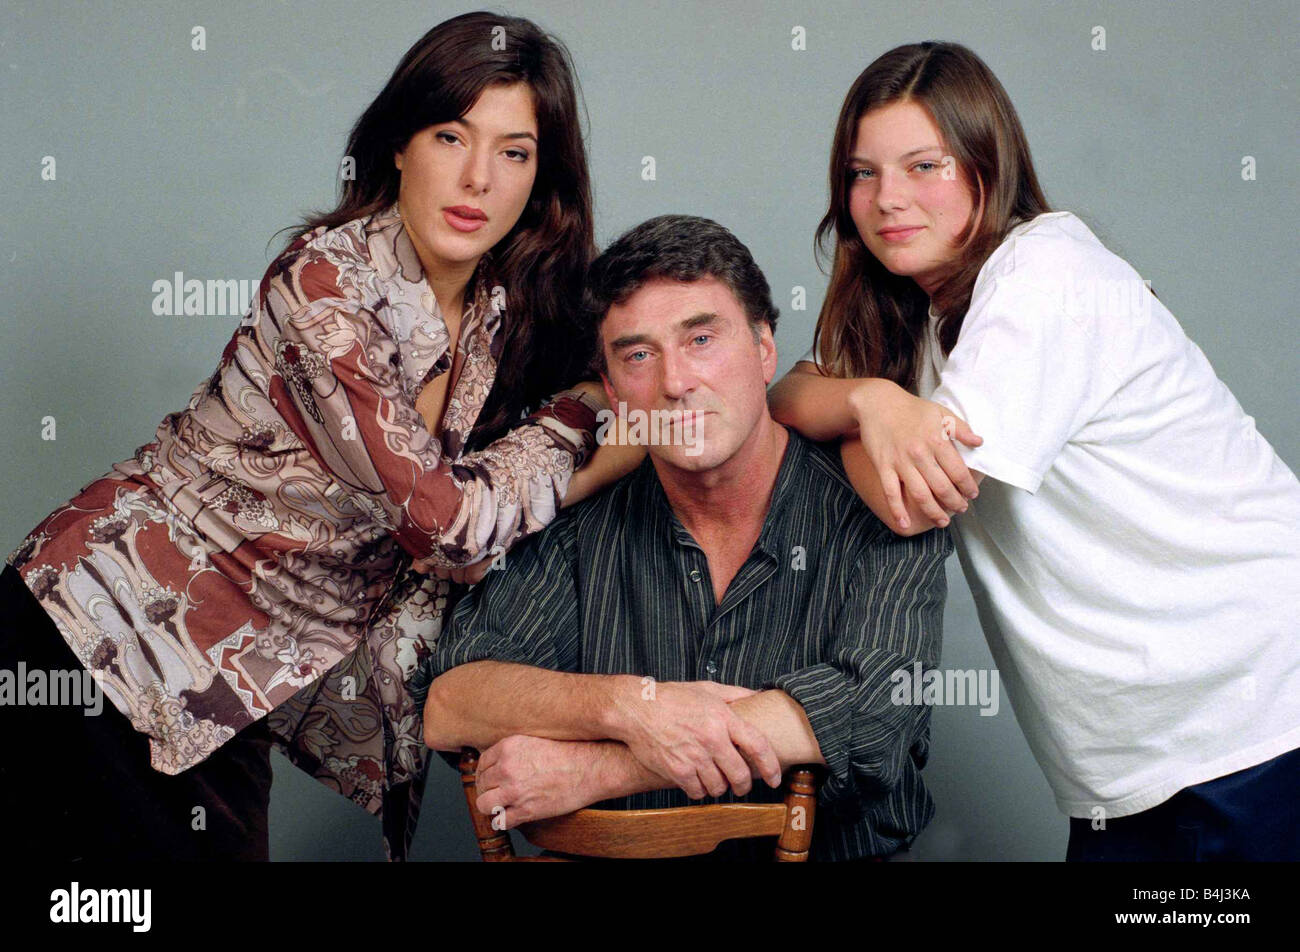 Actor Bill Murray from TV show The Bill poses with his two daughters Liz and Jaime September 1996 Stock Photo